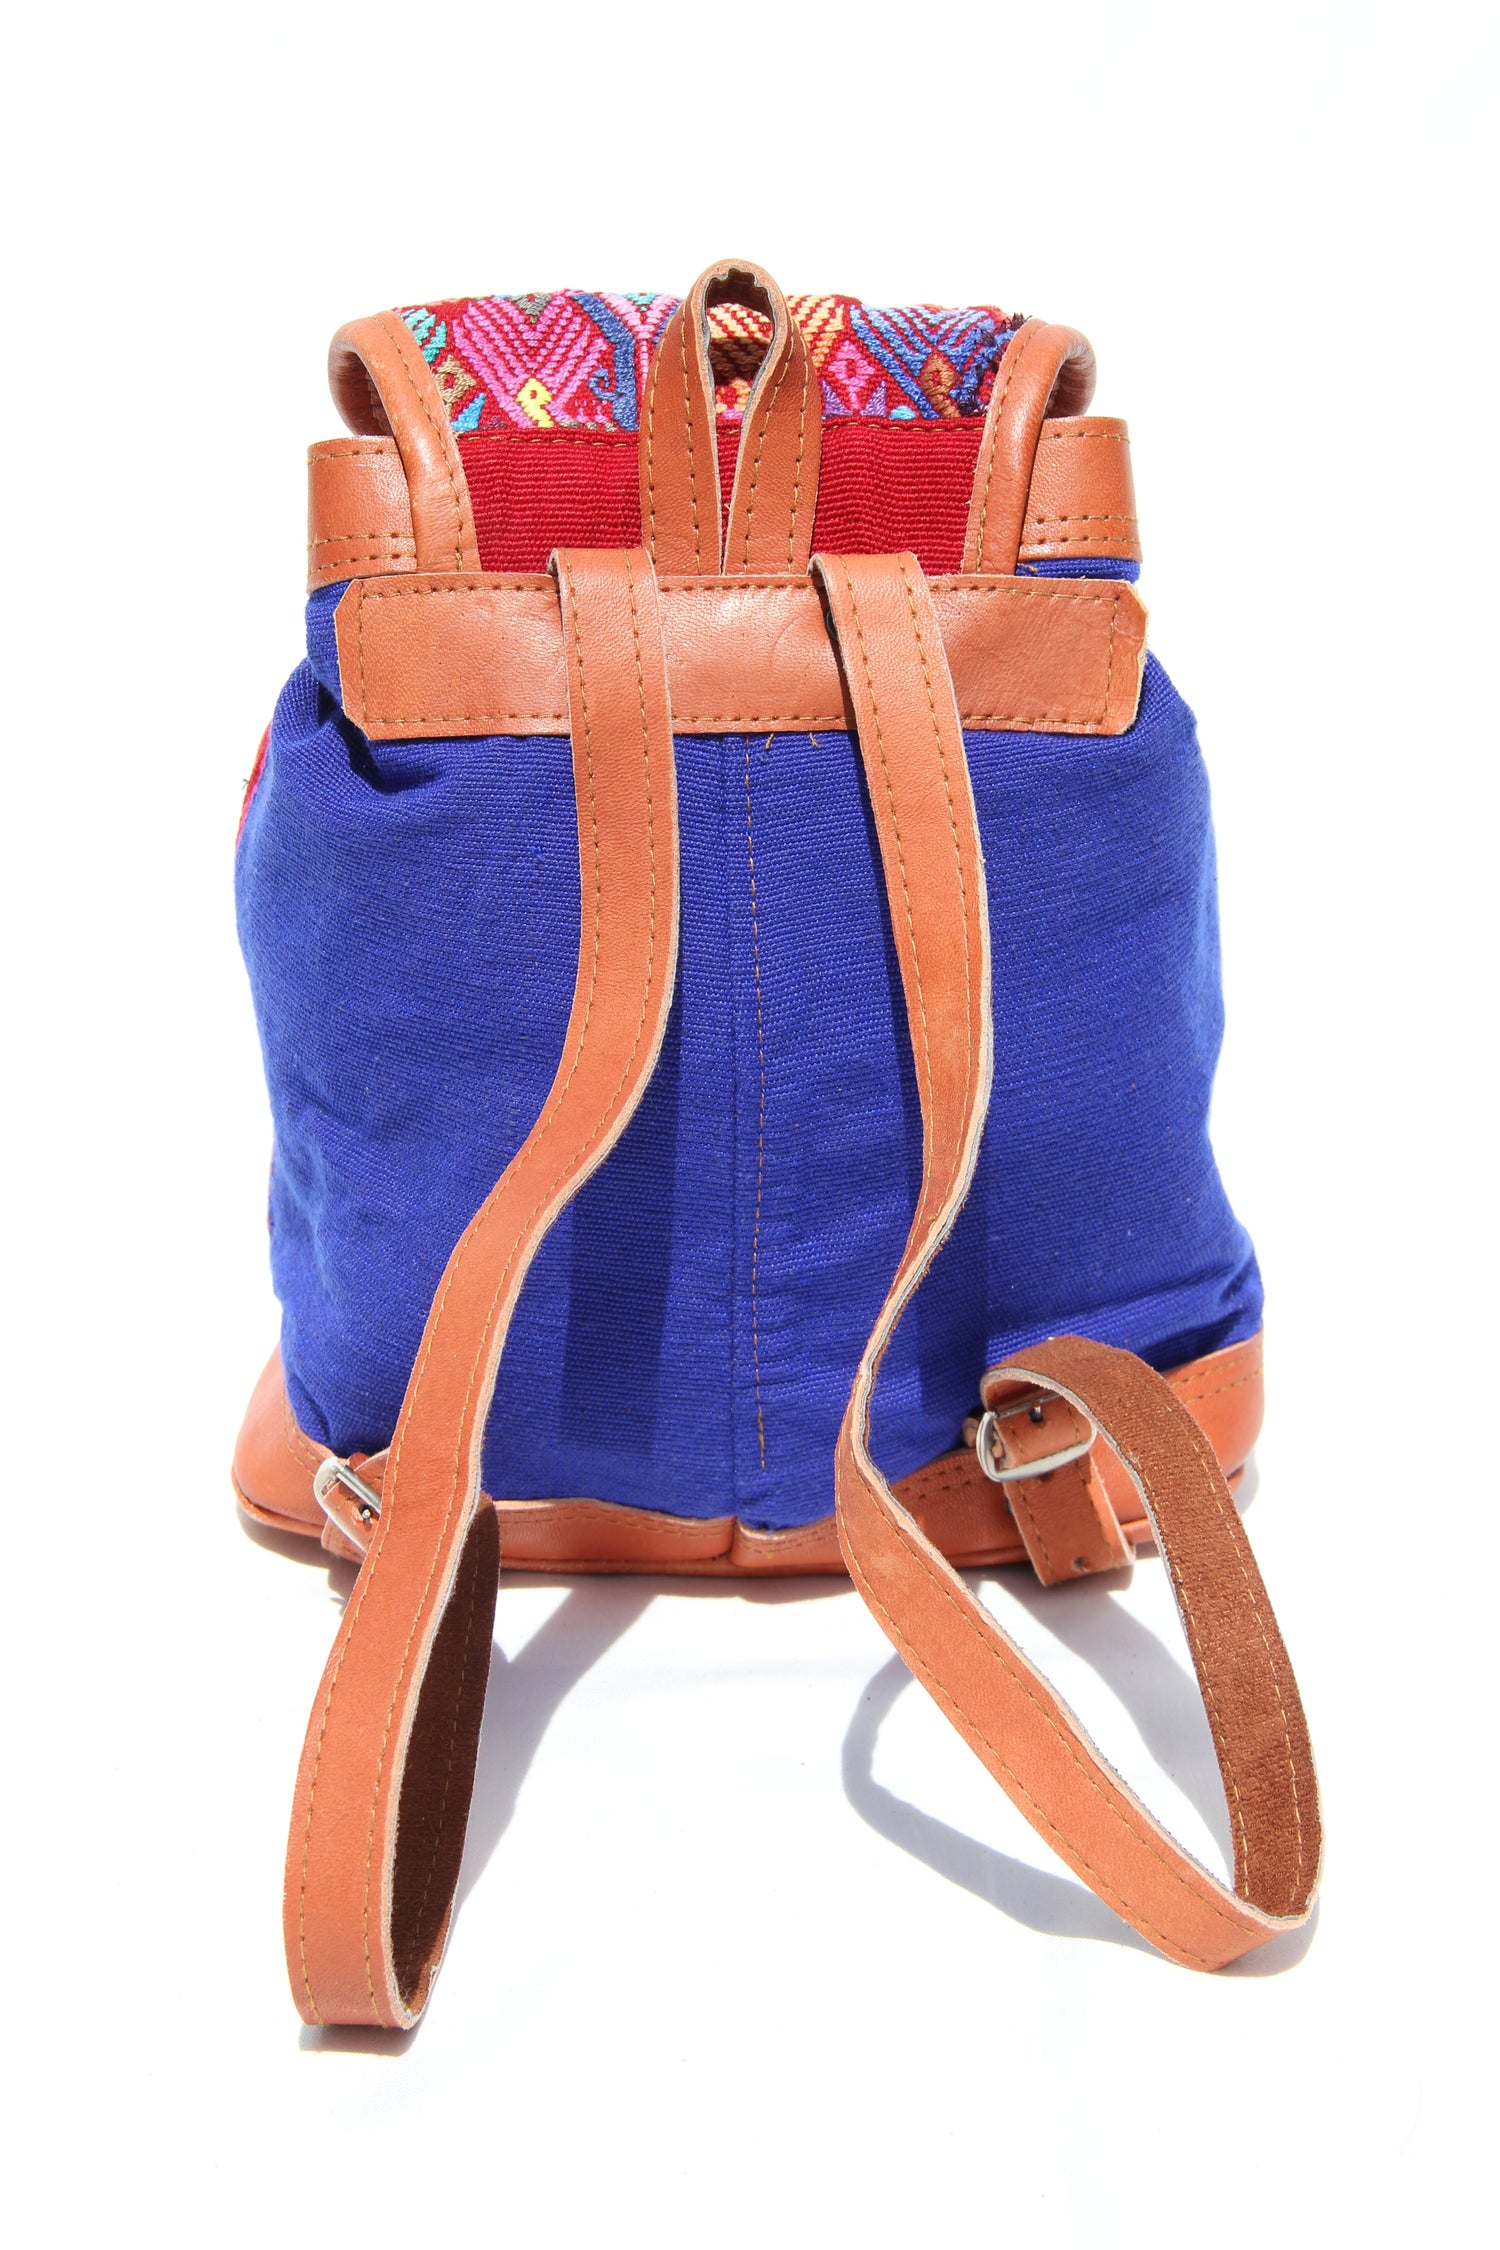 MIni leather huipil backpack hand woven with colorful embroidery and adjustable leather straps with front belt buckle closure and front zipper pocket perfect for hiking or beach trip